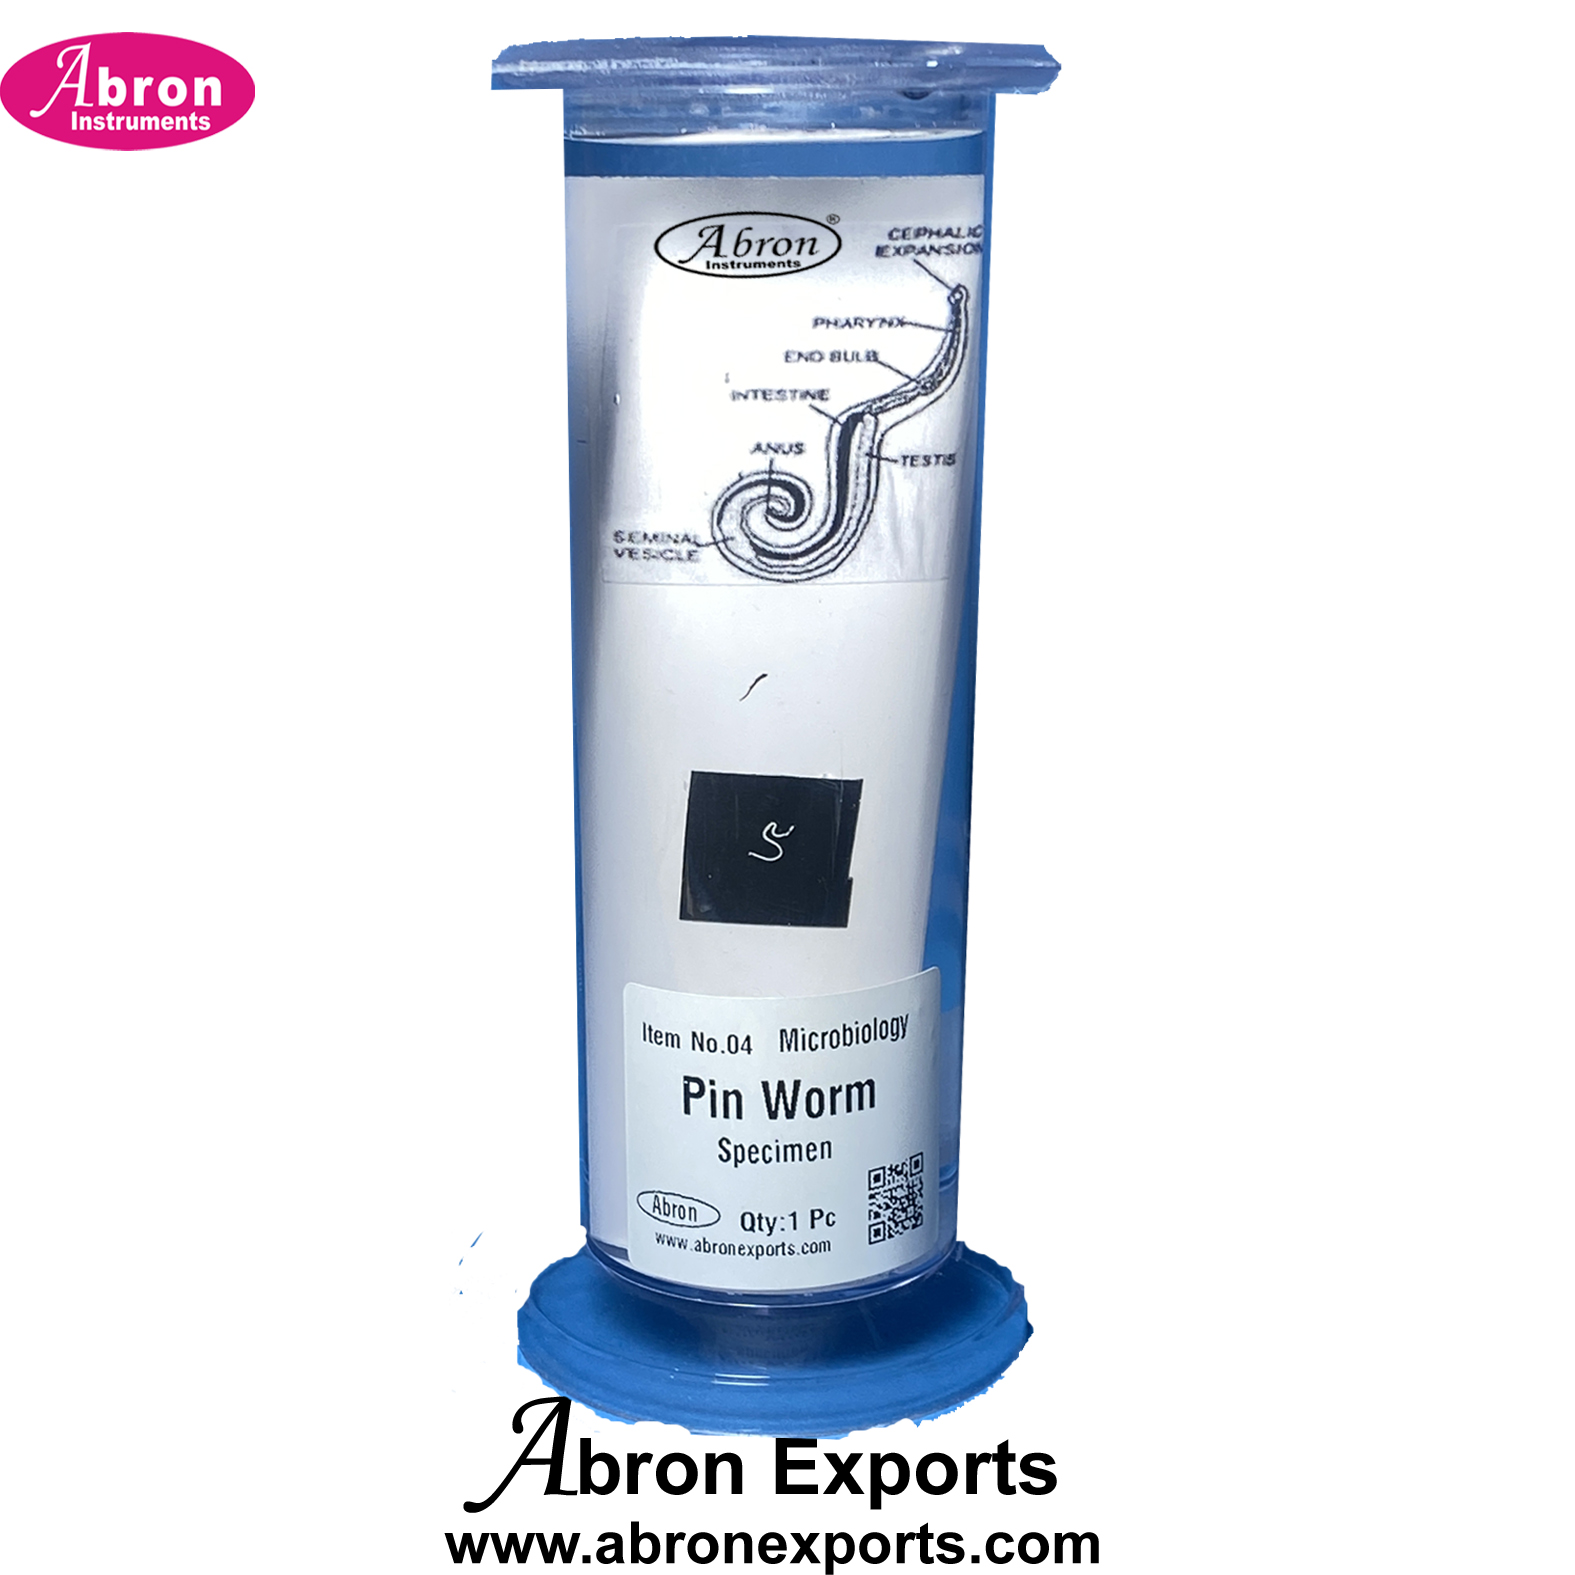 Medical College Pathology Human Parasites Pin worm Specimens in Jar preserved Abron ABM-3059PW 